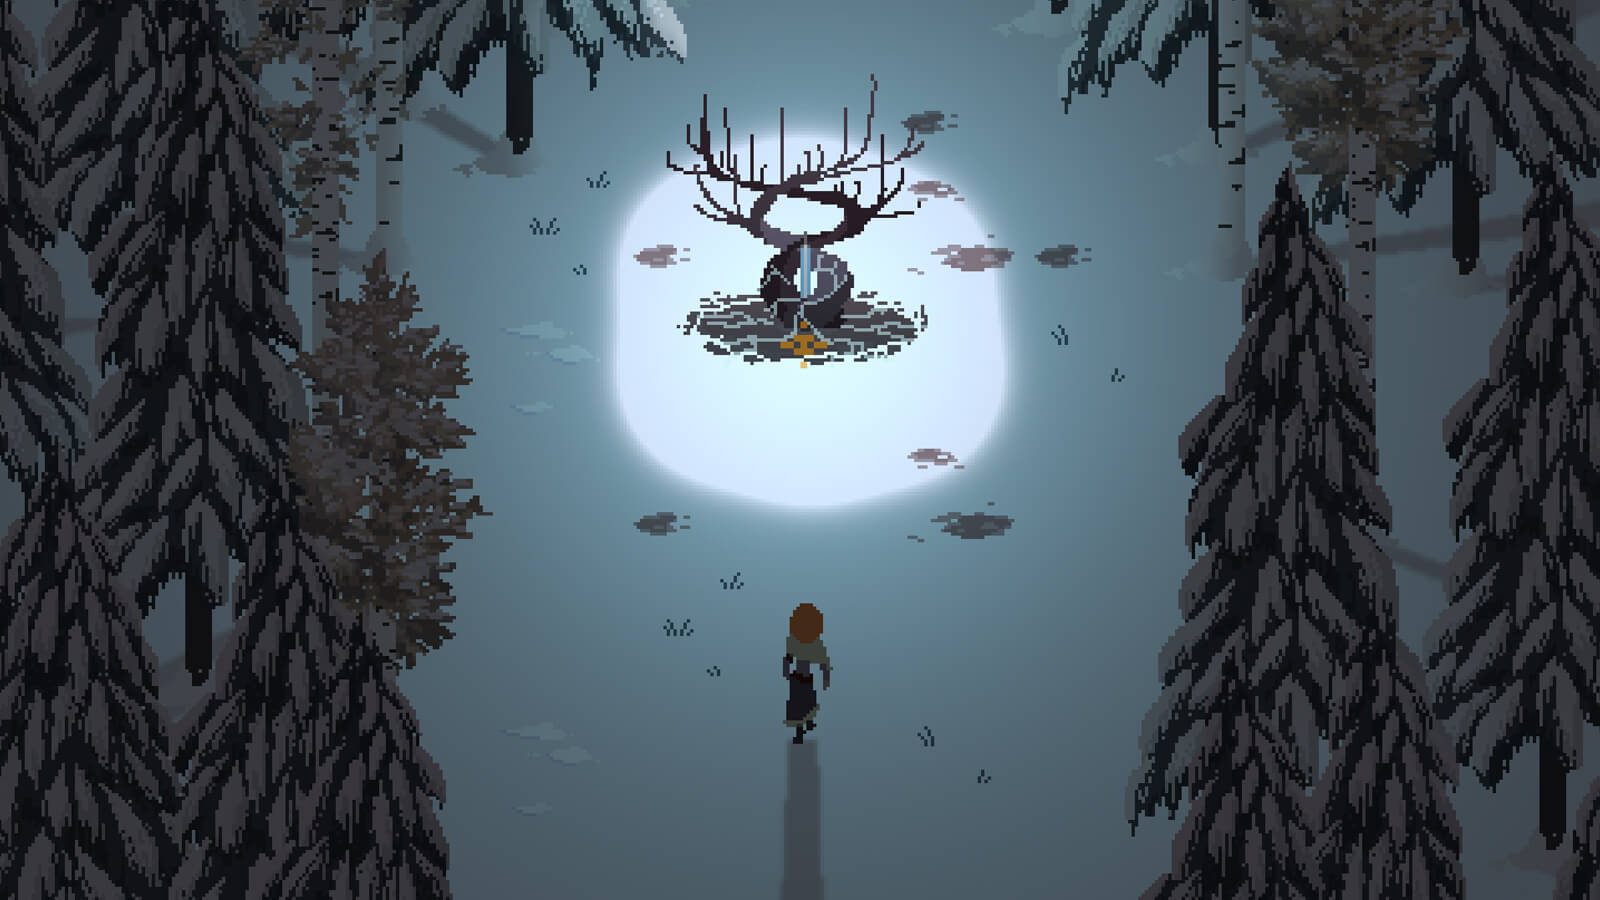 The game's heroine approaches a blade stuck in the base of a twisted, glowing tree, surrounded by darkness. 